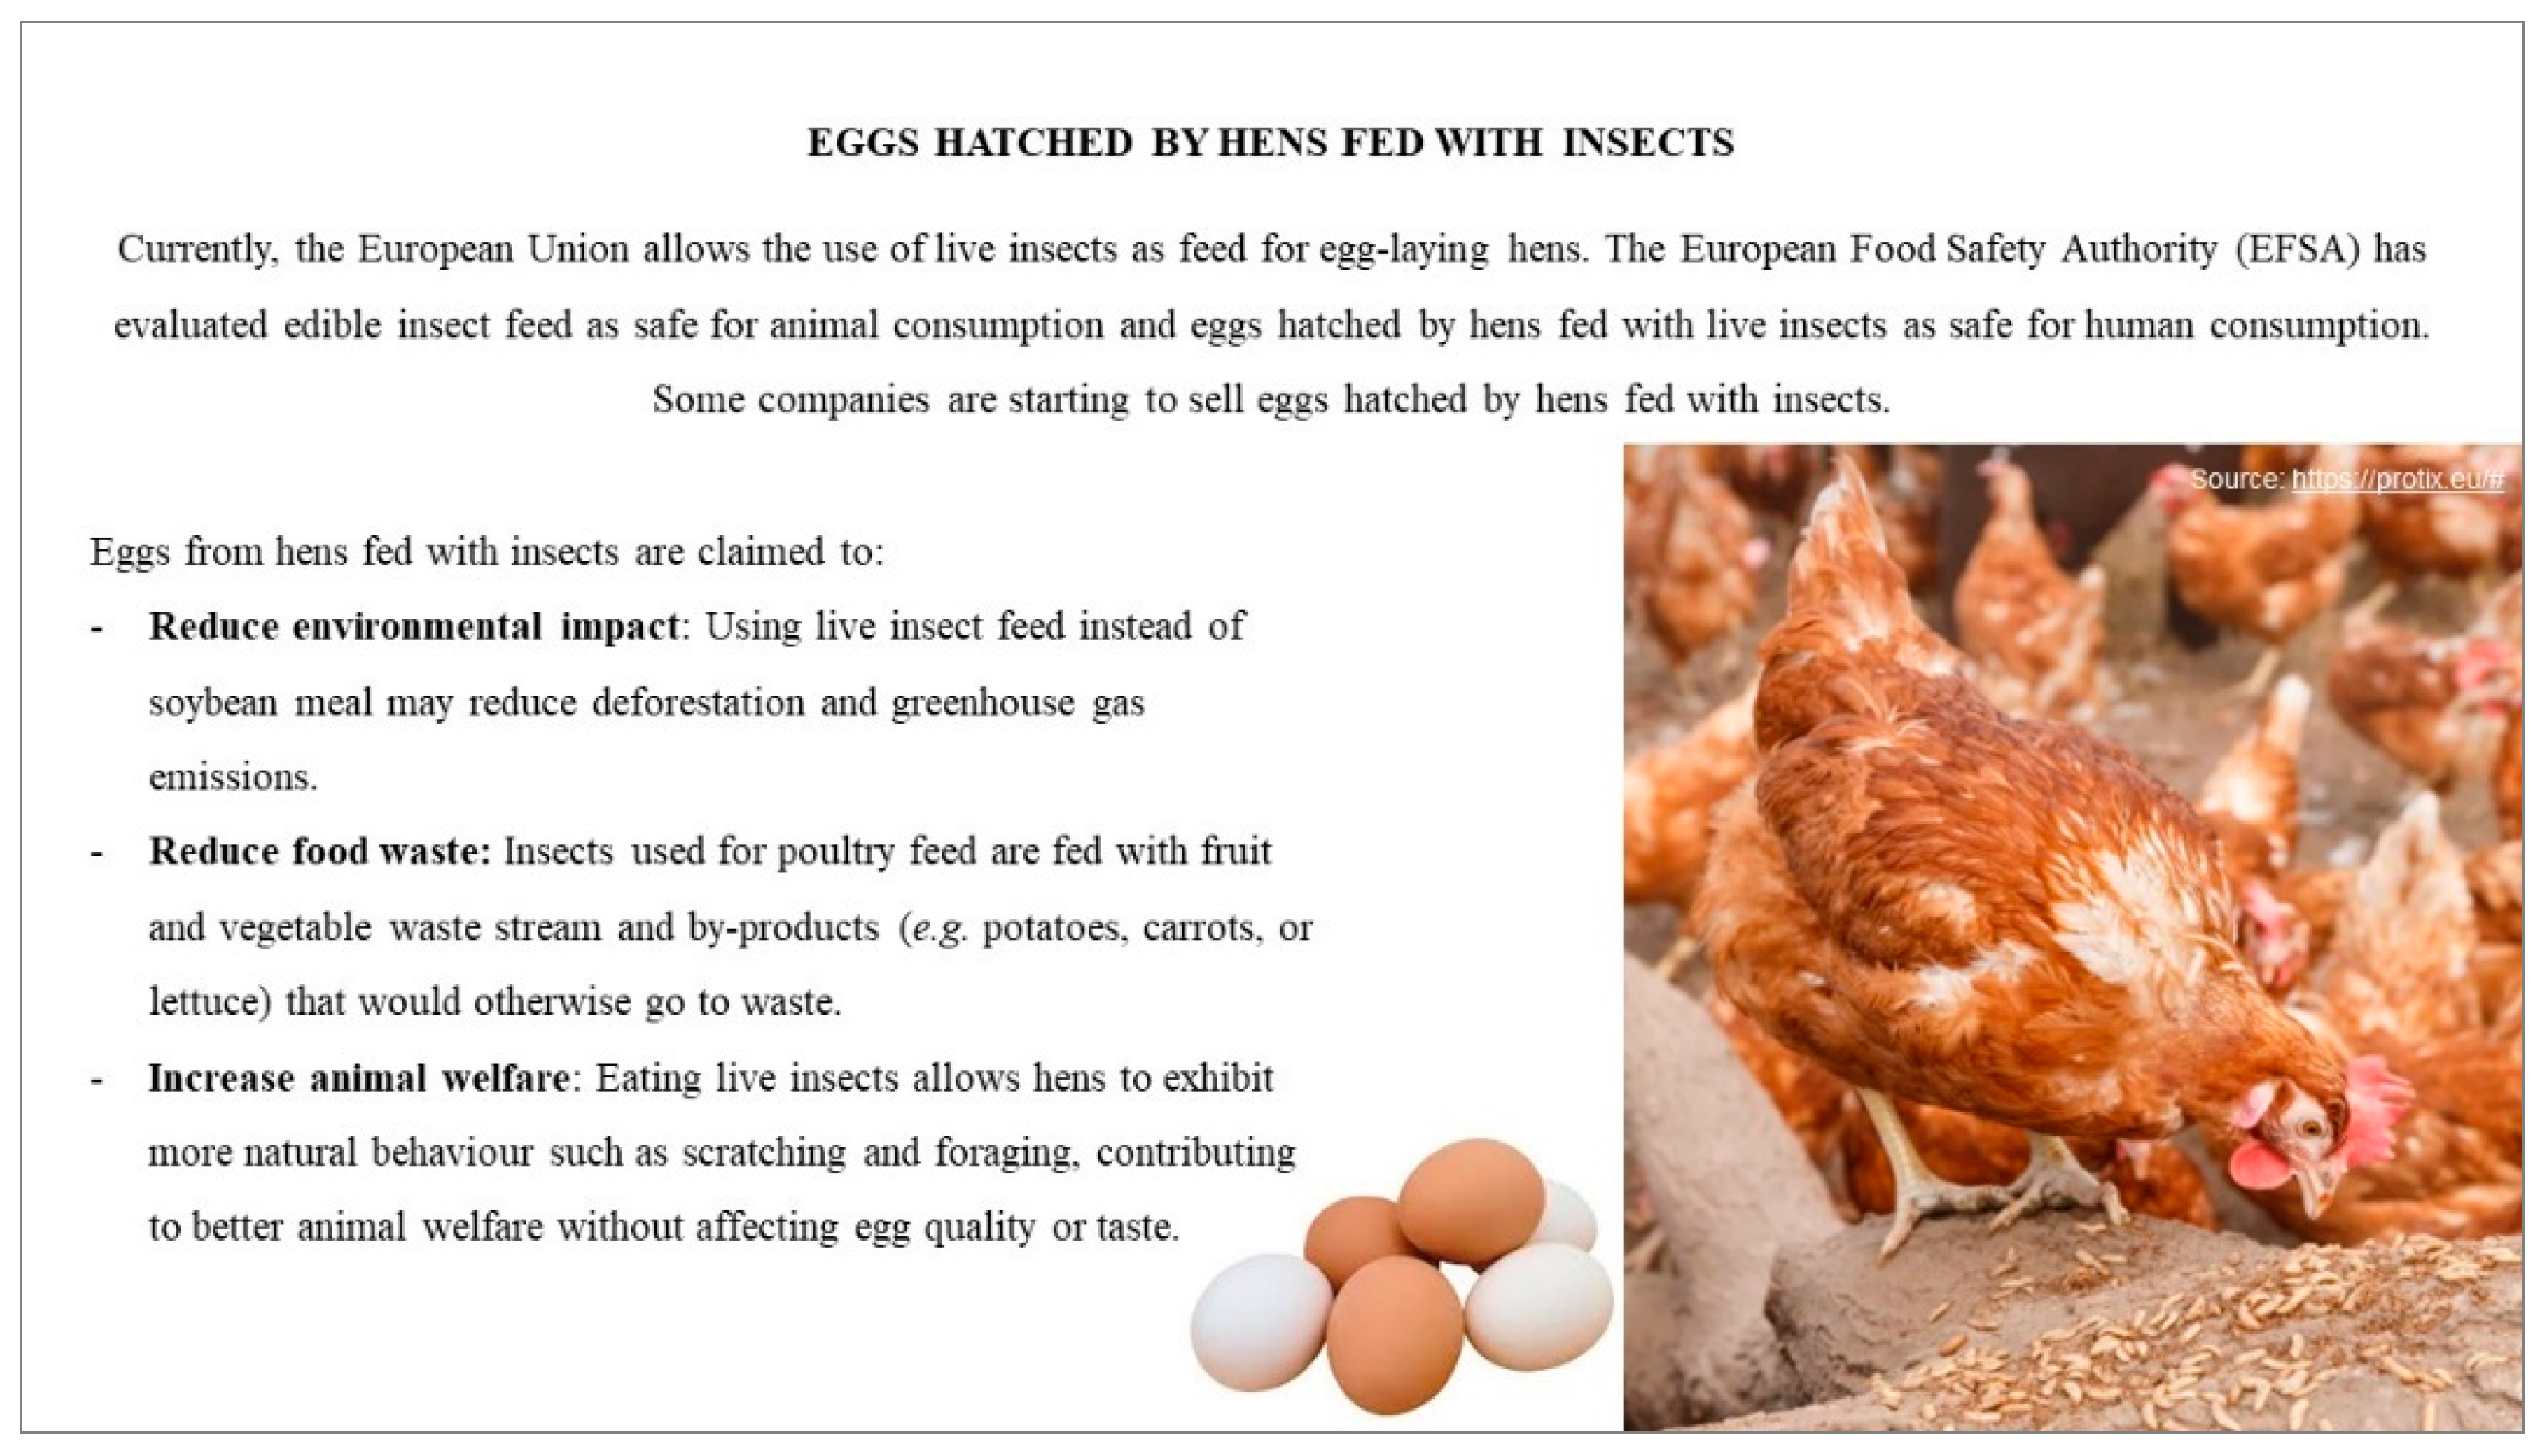 IV. Factors Influencing Soil Respiration in the Presence of Hens